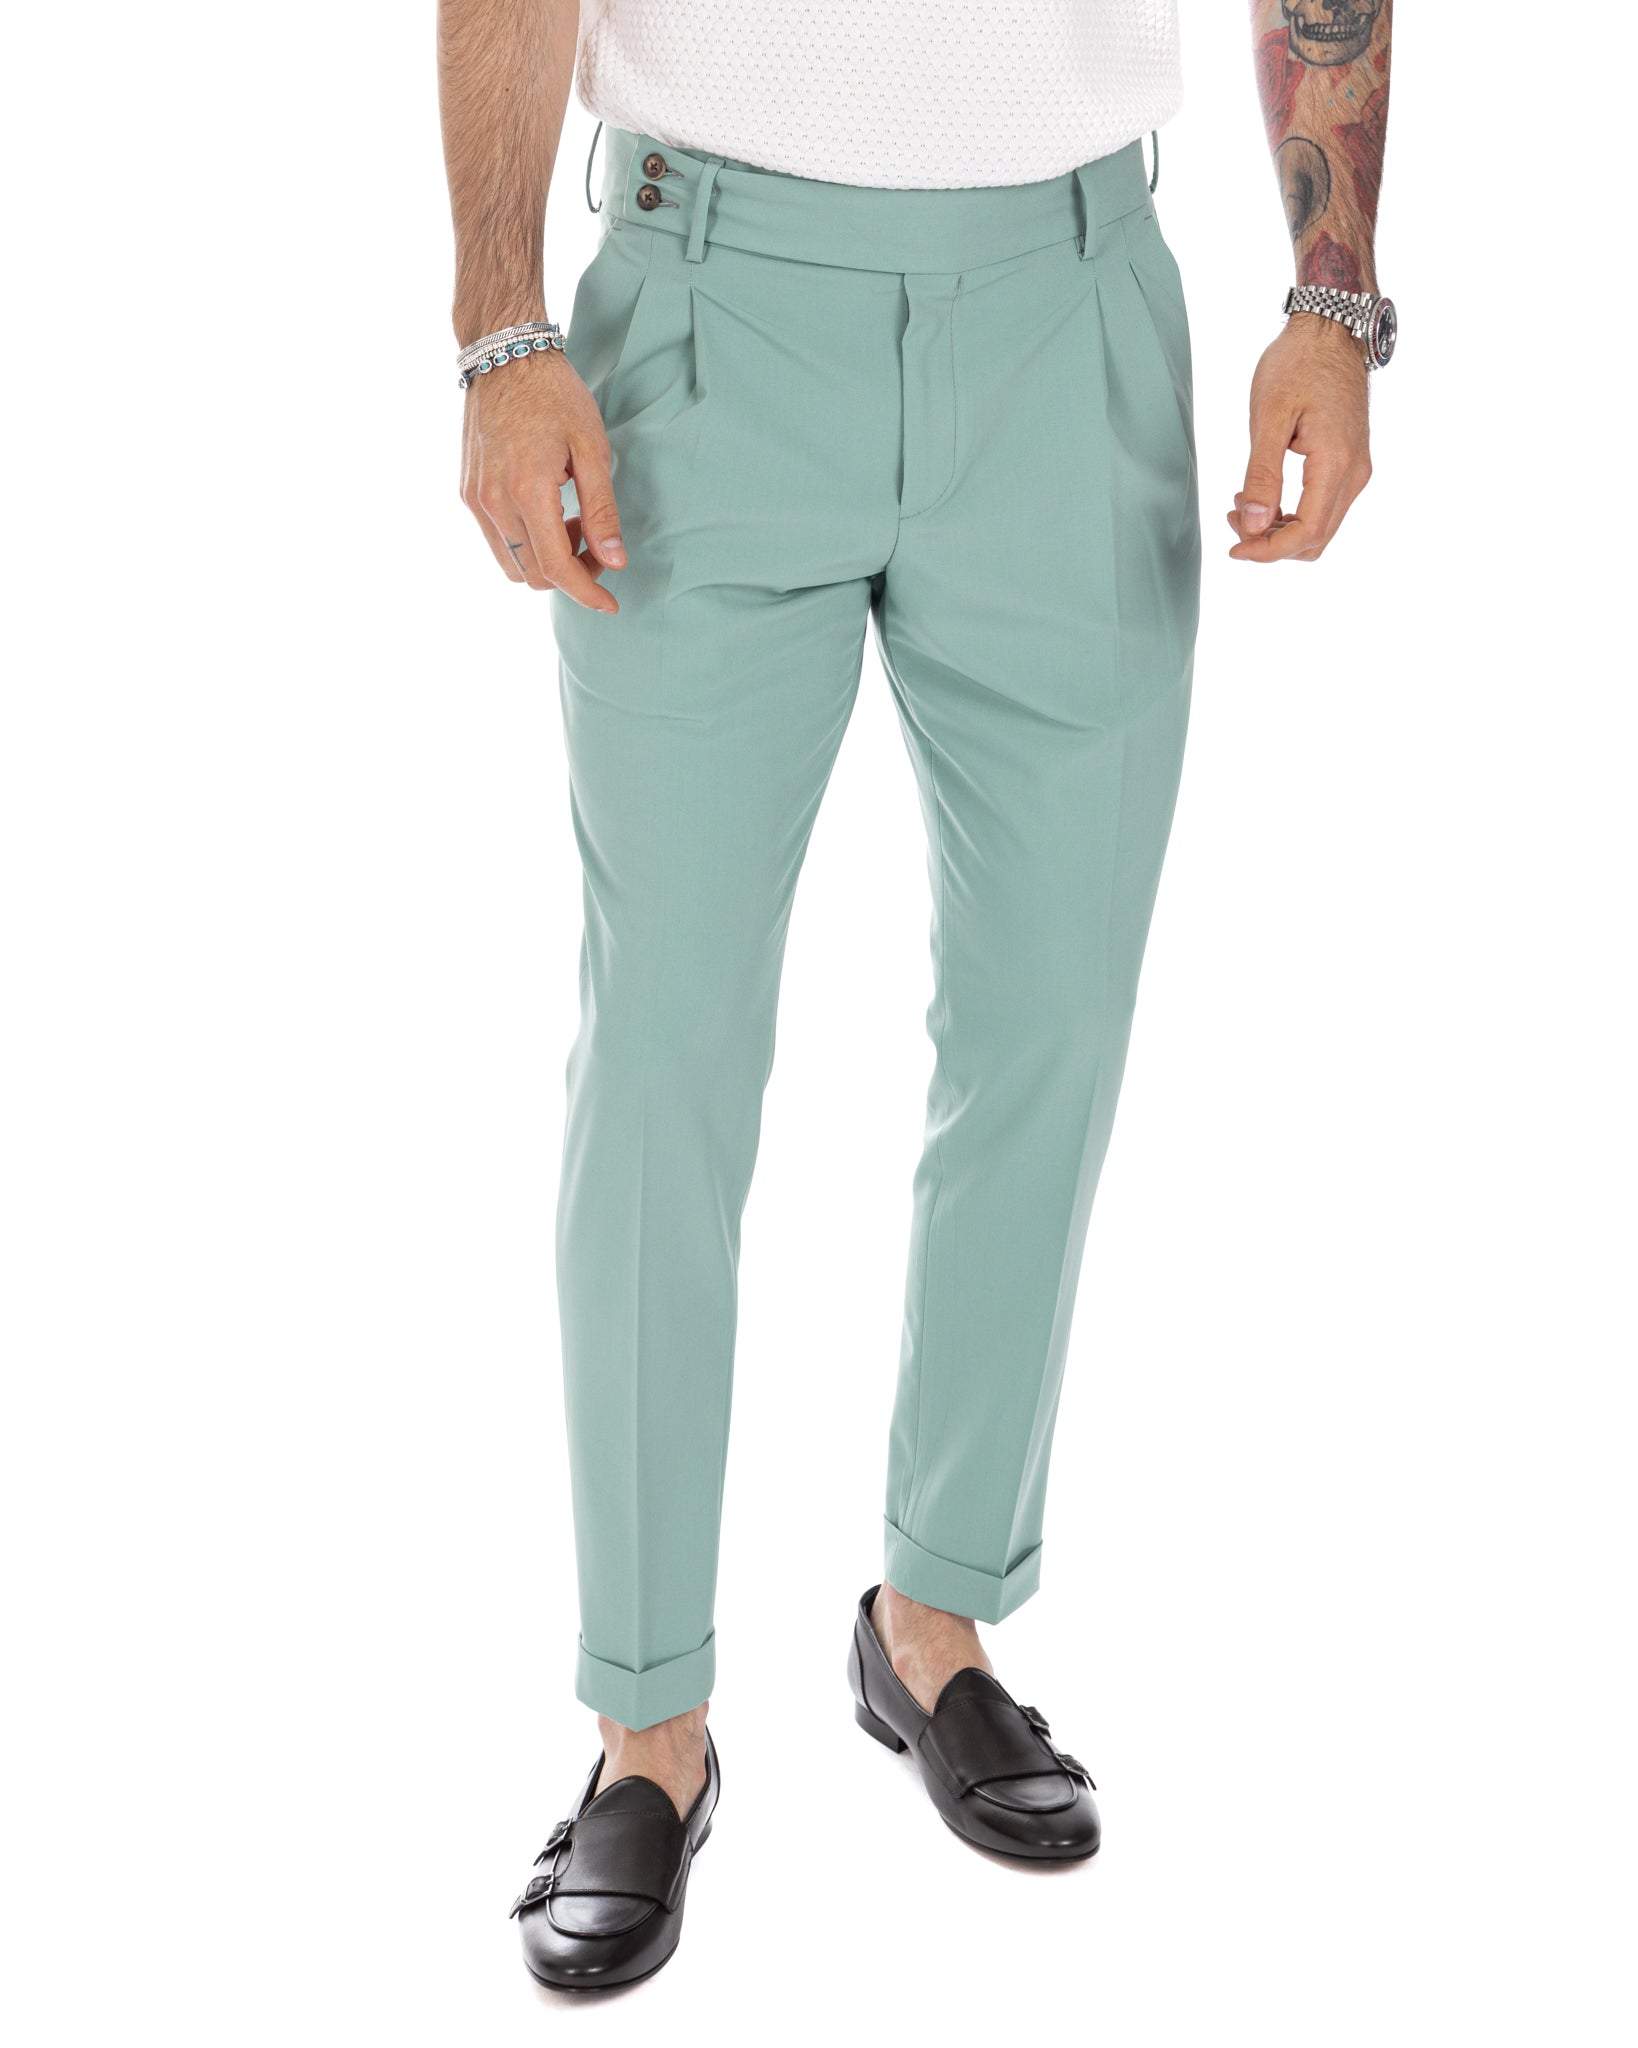 Caprera - turquoise high waisted trousers